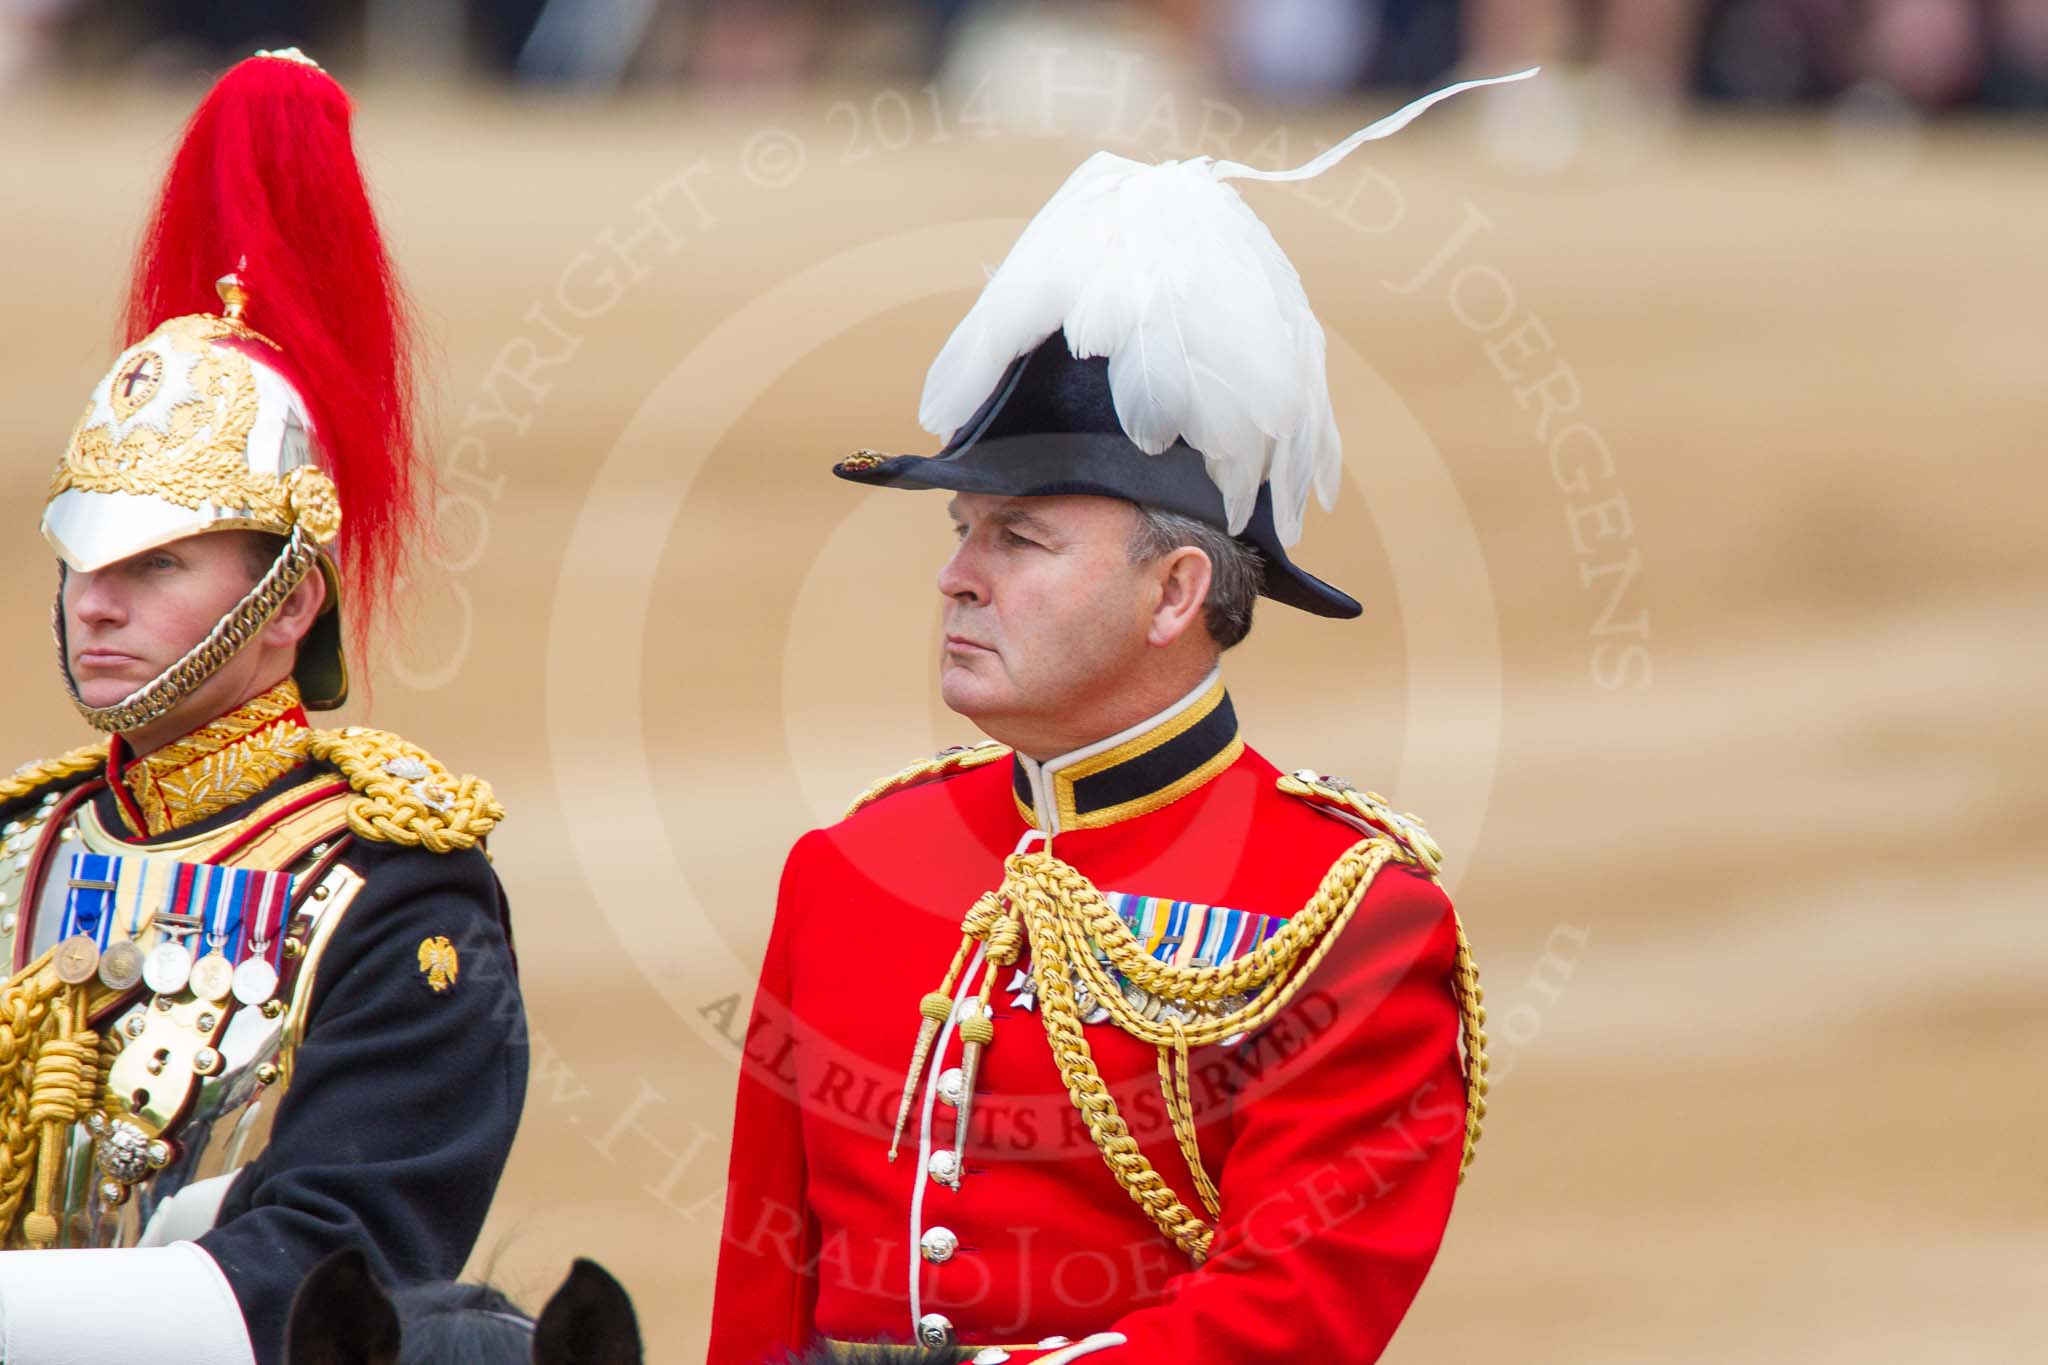 Trooping the Colour 2014.
Horse Guards Parade, Westminster,
London SW1A,

United Kingdom,
on 14 June 2014 at 11:03, image #396